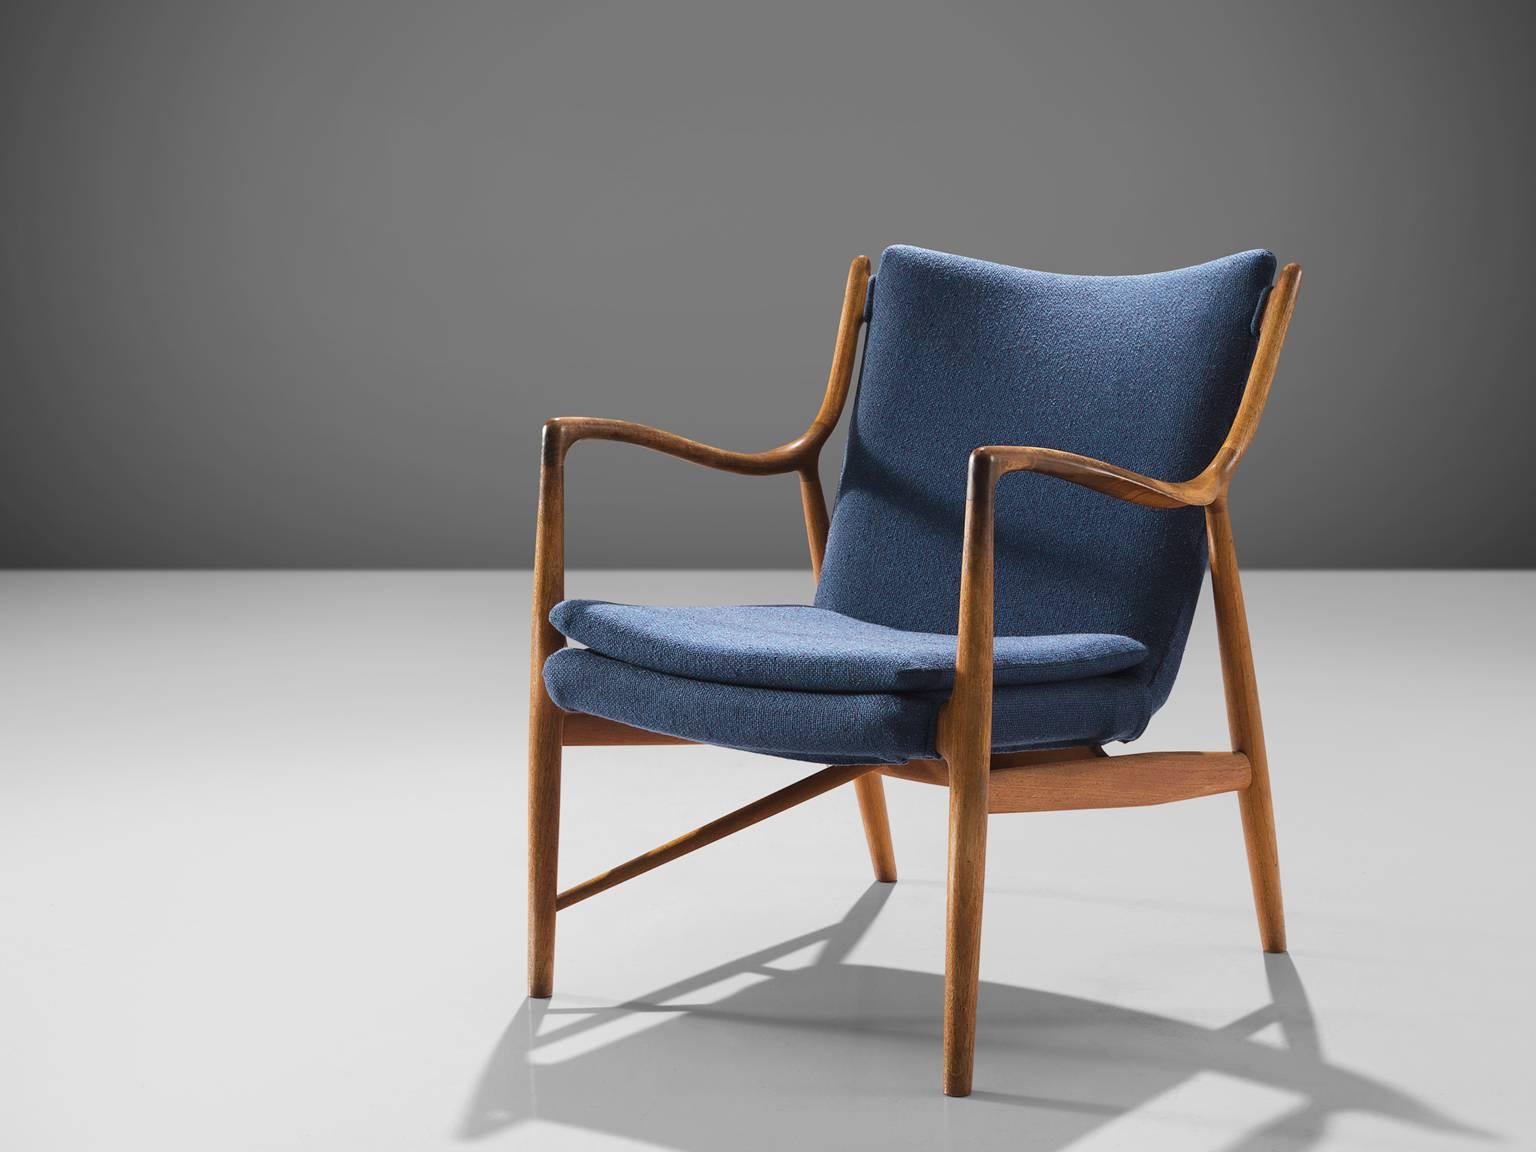 Finn Juhl for Niels Vodder, NV45, teak and fabric, Denmark, design 1945, production 1950s. 

This NV45 chair by Finn Juhl and Niels Vodder is executed in teak and blue fabric. The chair is made by master woodworker Niels Vodder and is marked on